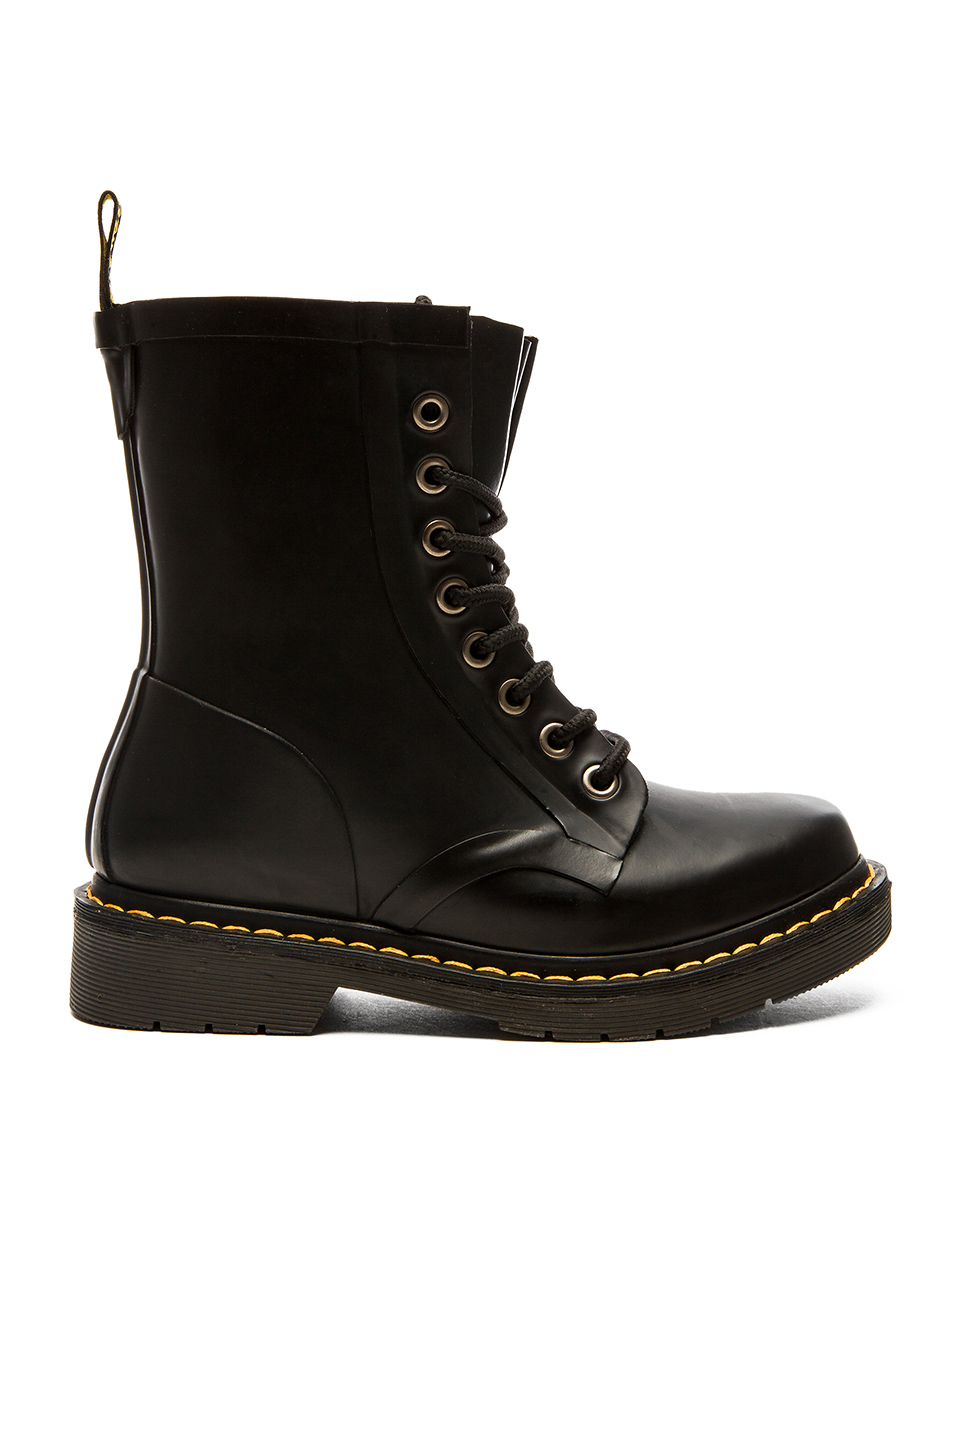 Lyst - Dr. Martens Drench 8 Eye Lace-Up Rubber Boots in Black